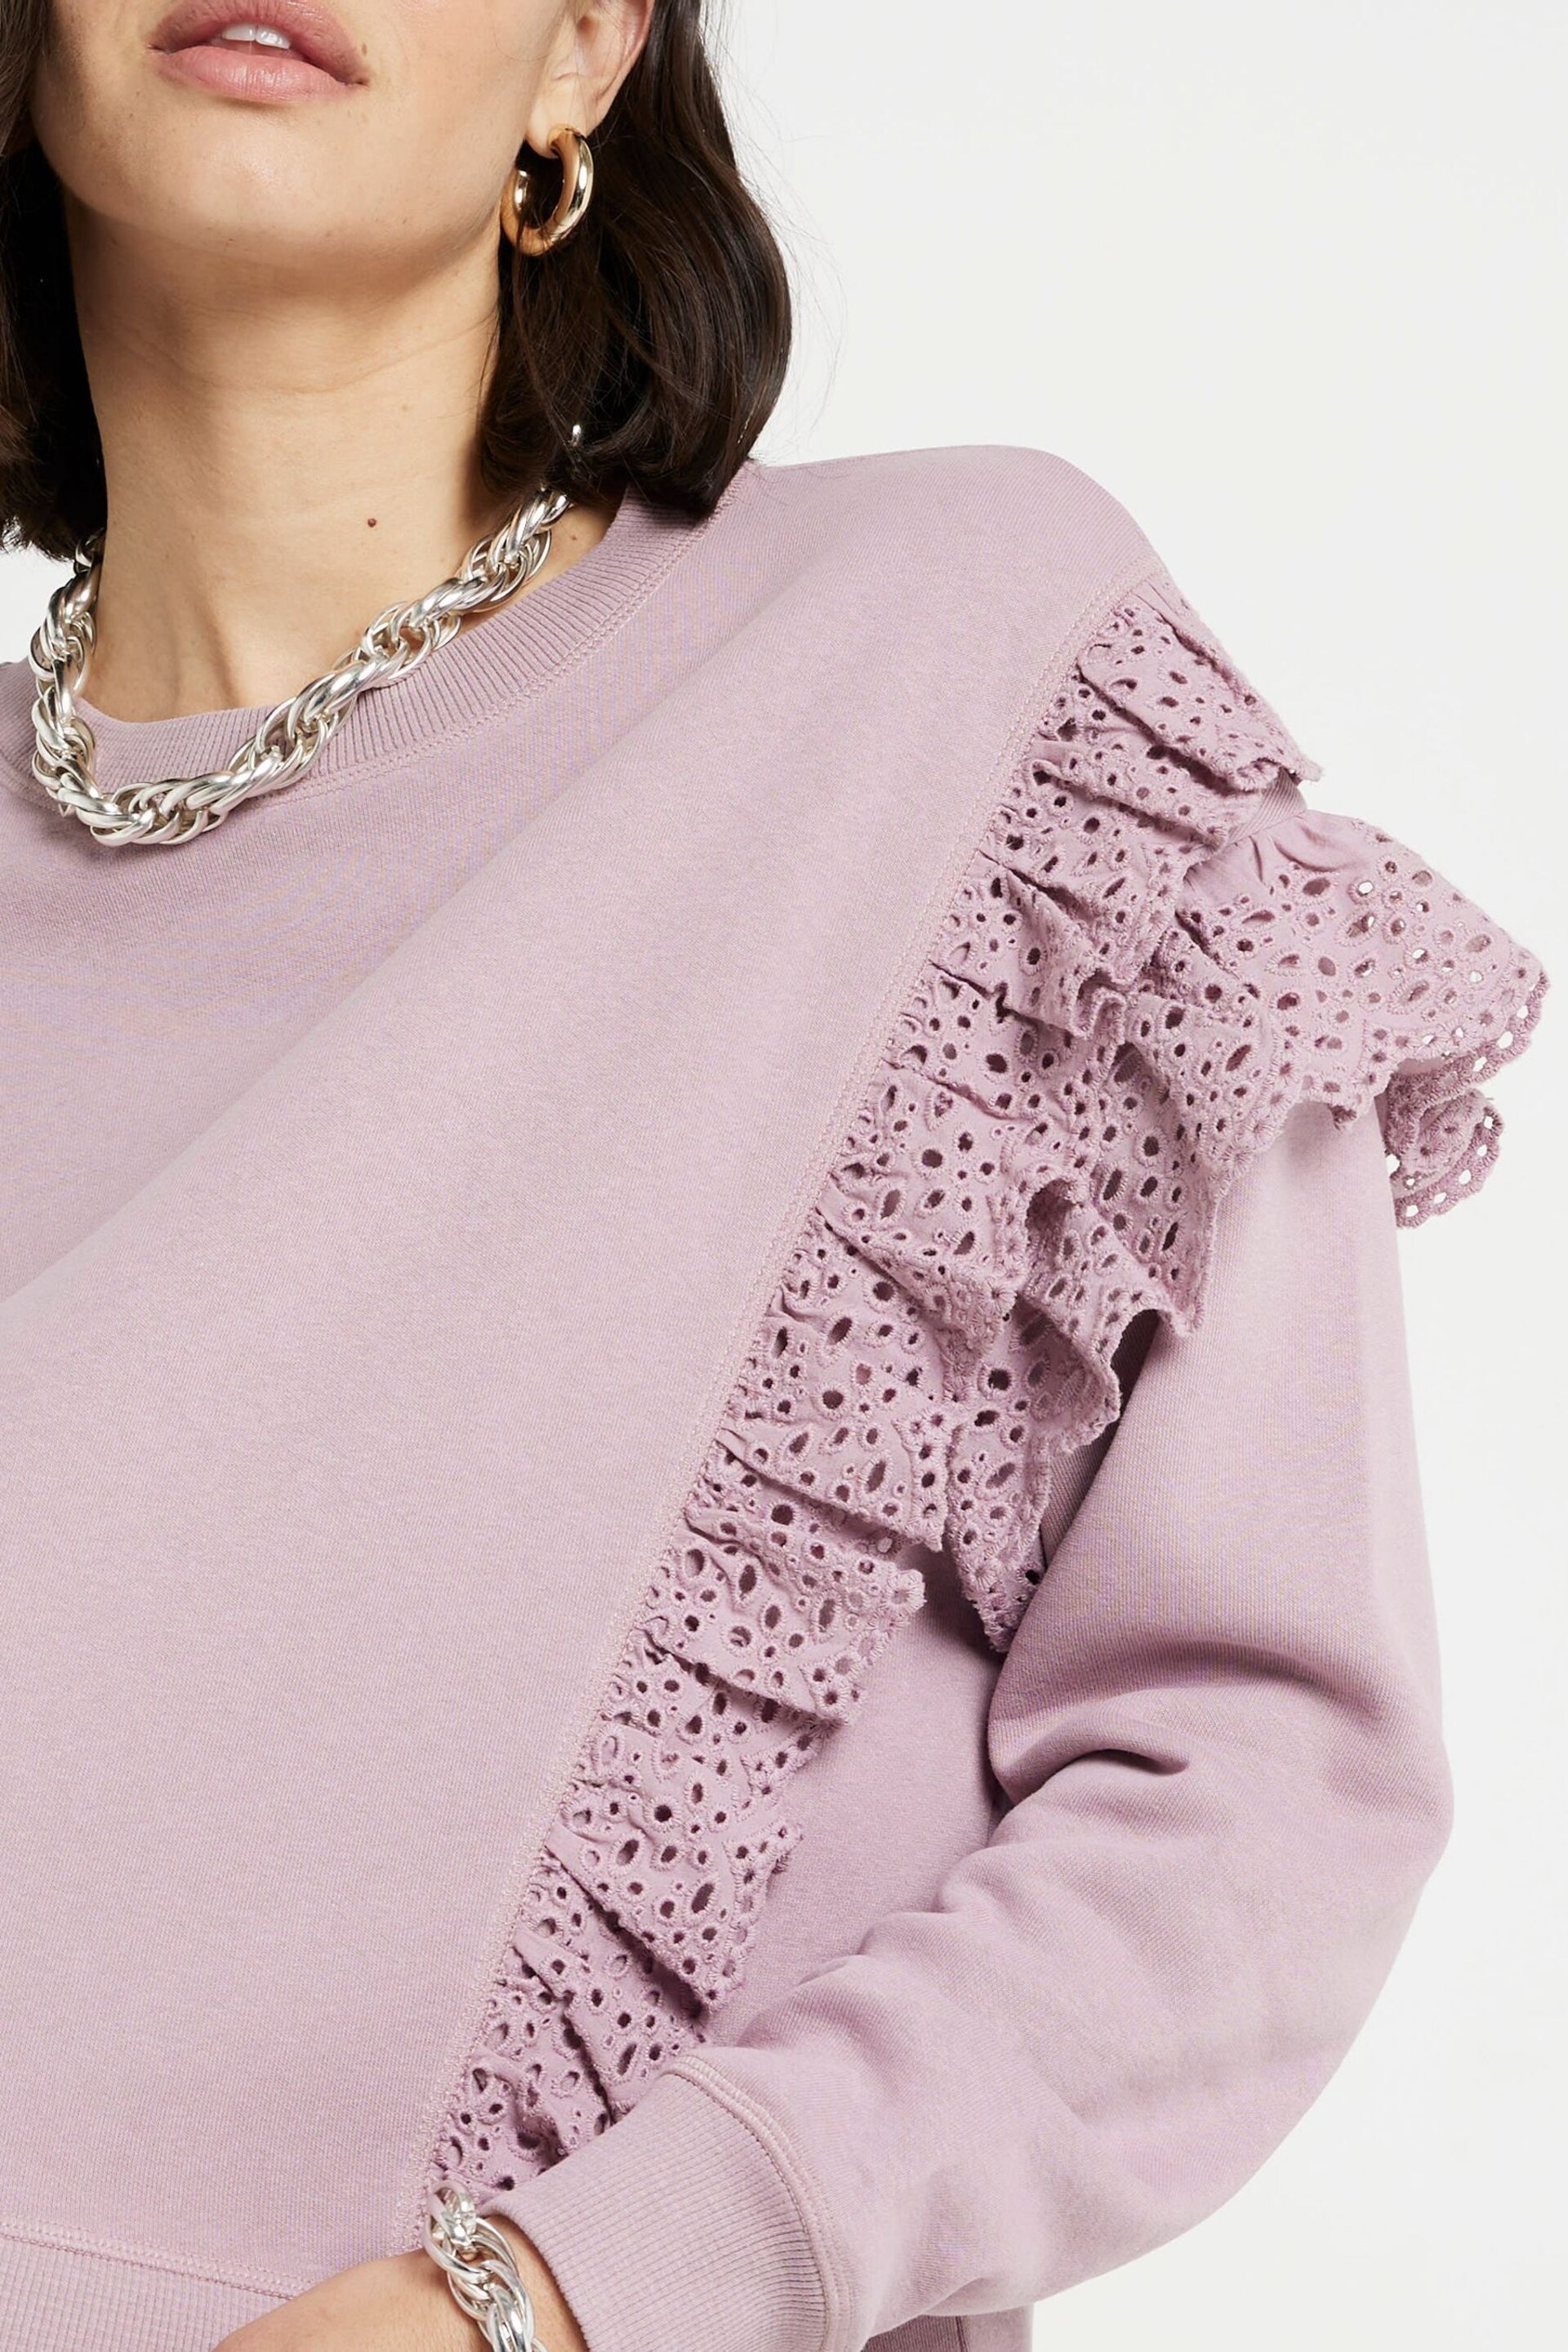 River Island Pink Broderie Frill Sweatshirt - Image 3 of 4